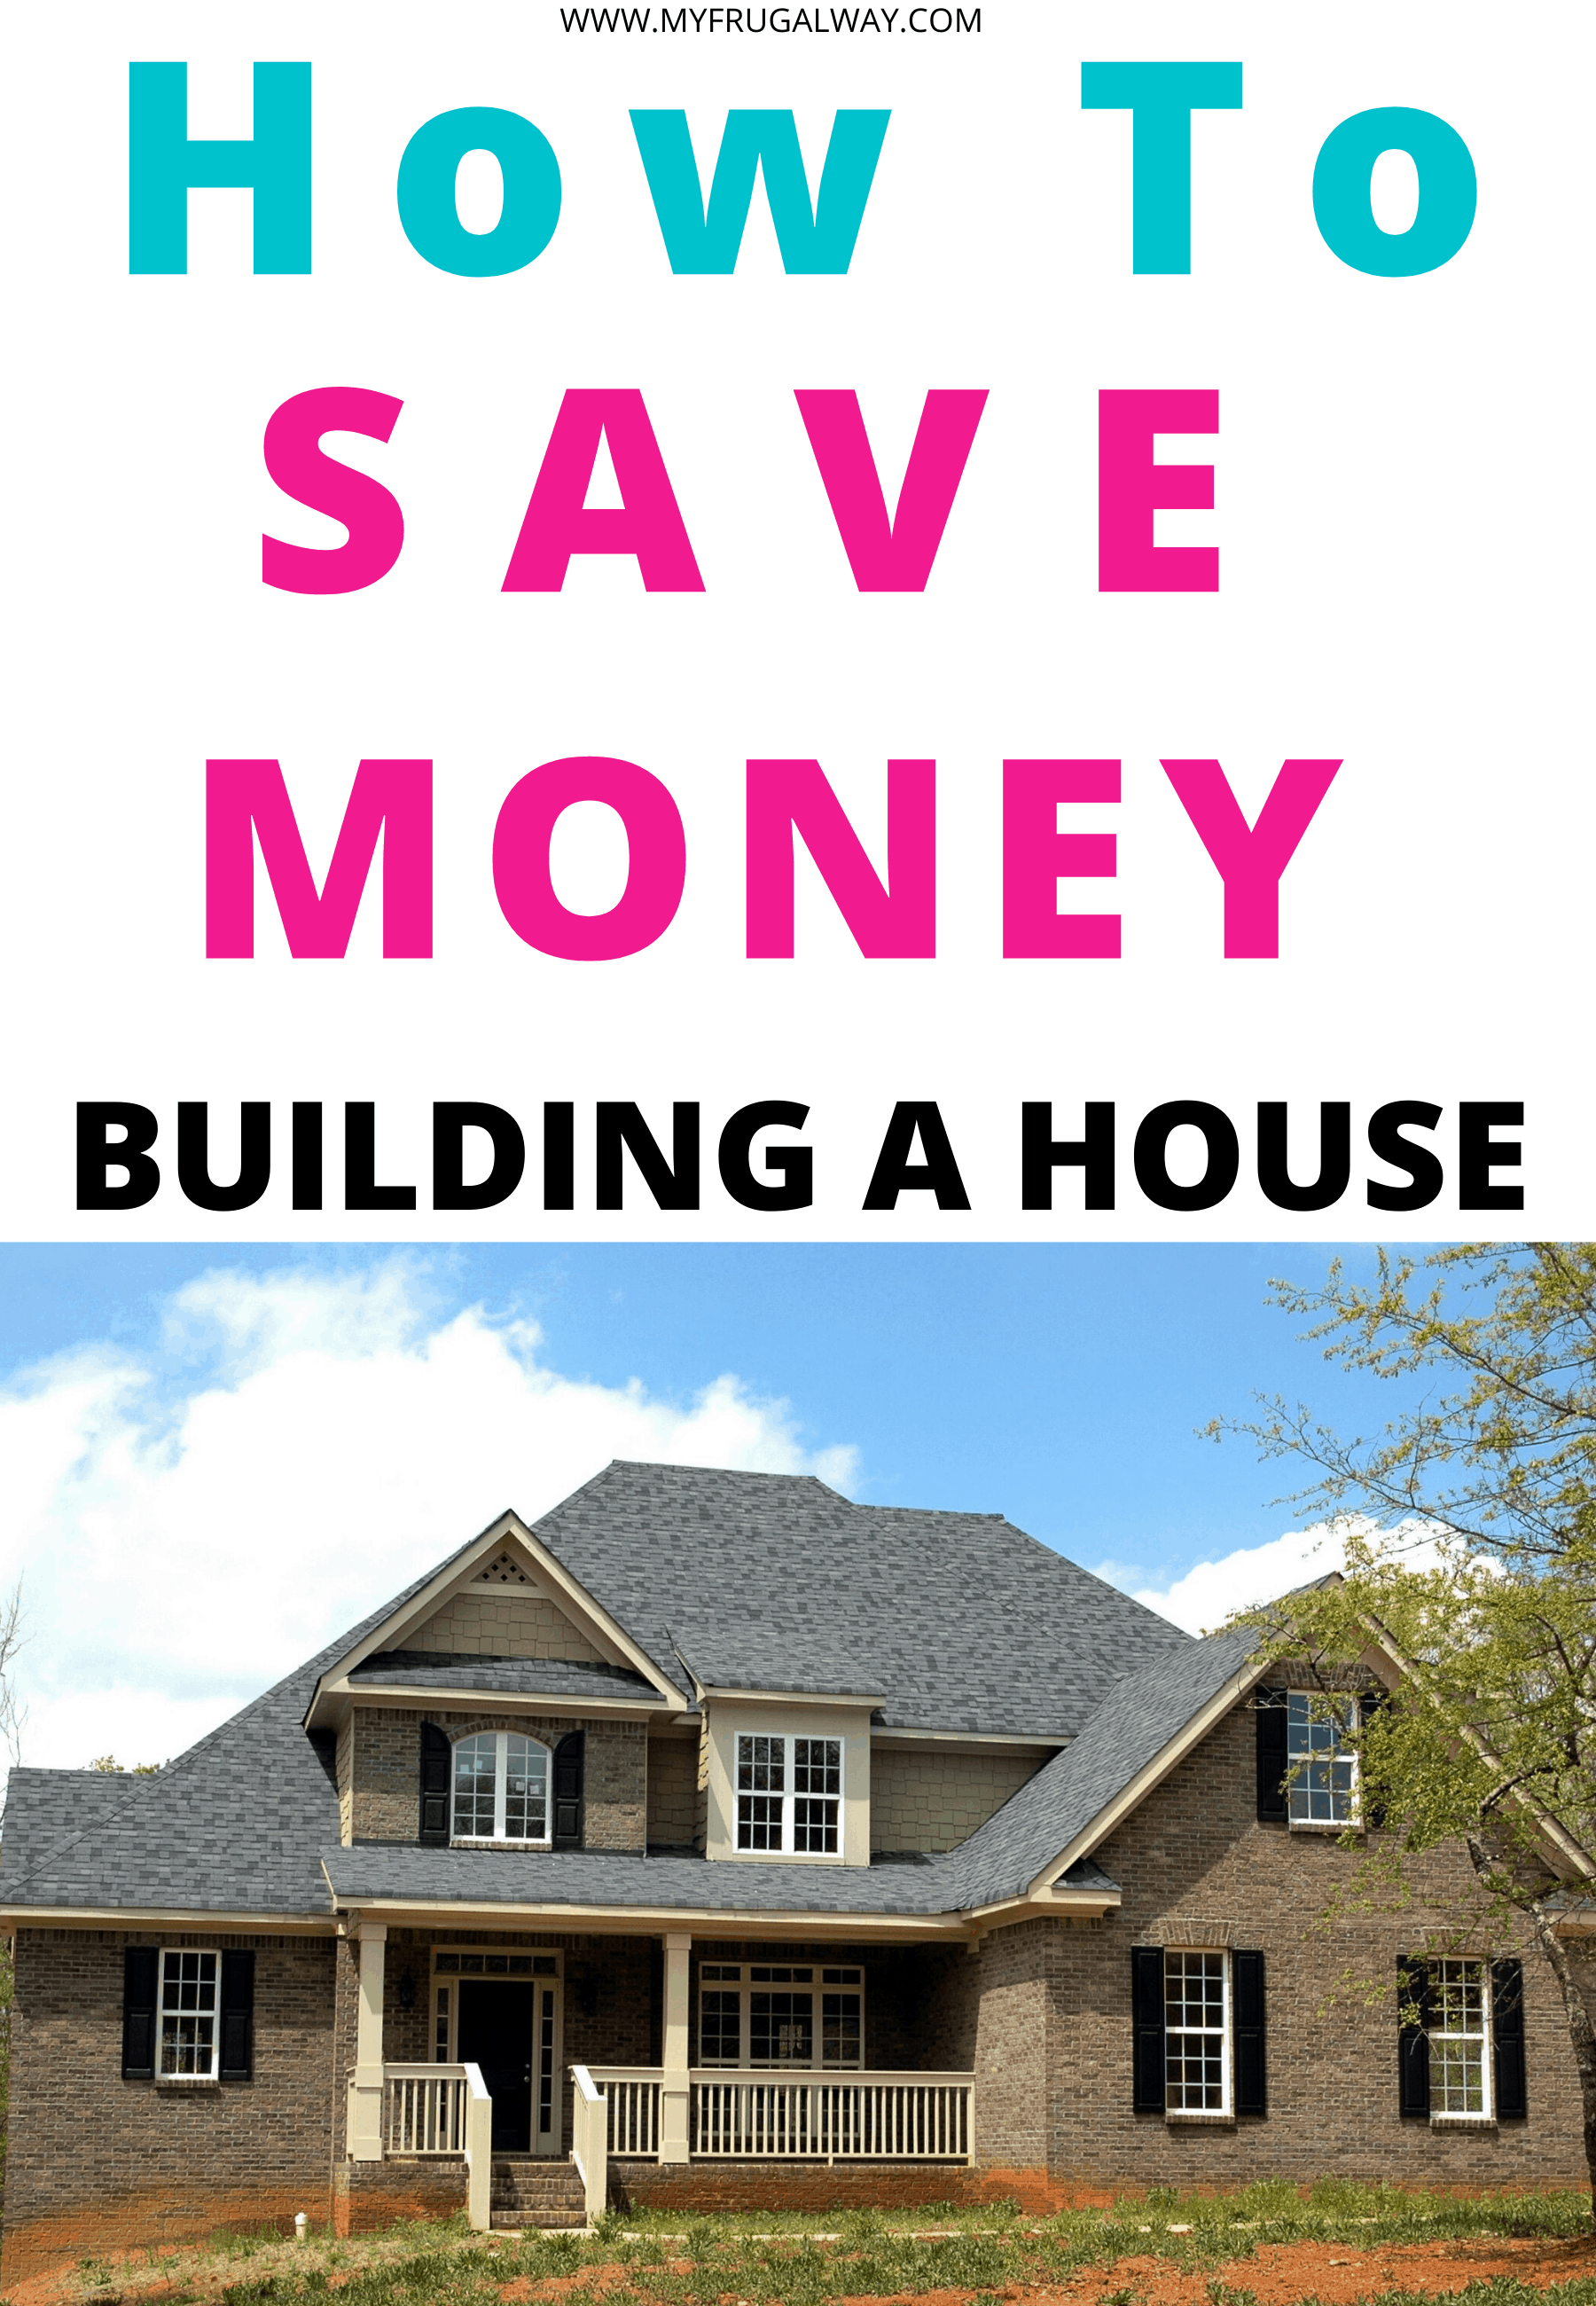 Budgeting tips when building a house. Looking for tips to save money for dream home? These smart money saving tips will help you ti design your dream home and not break the bank. #dreamhome #homebuilding #budget 